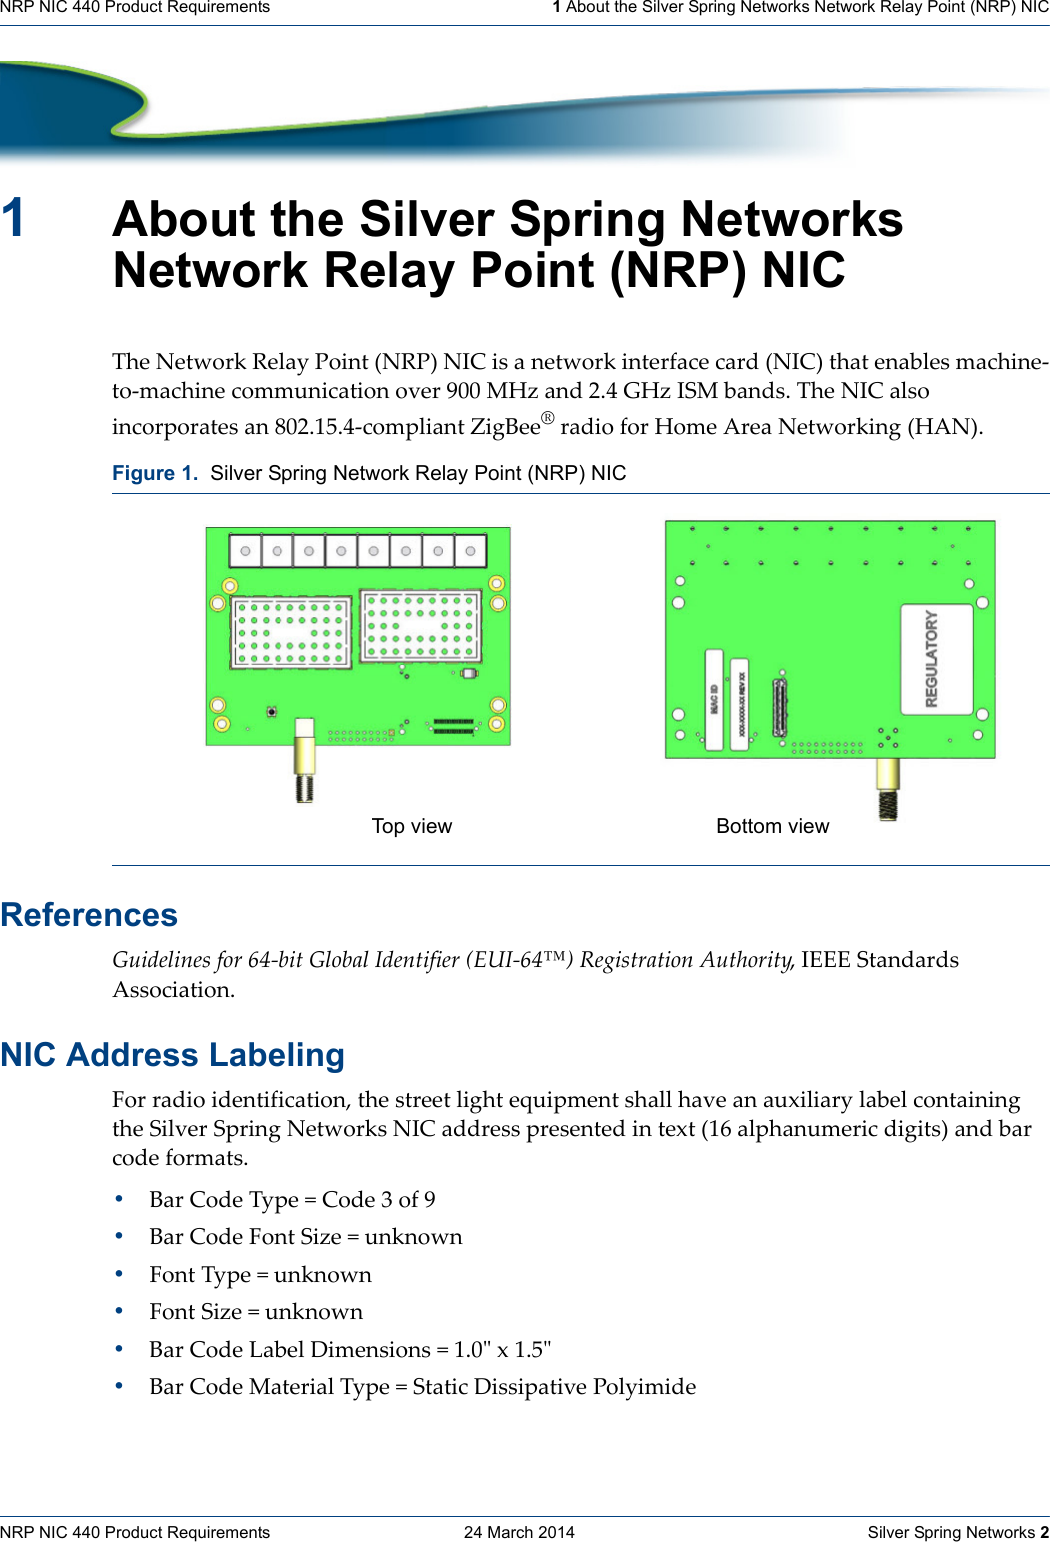 NRP NIC 440 Product Requirements    24 March 2014    Silver Spring Networks 2NRP NIC 440 Product Requirements   1 About the Silver Spring Networks Network Relay Point (NRP) NIC1About the Silver Spring Networks Network Relay Point (NRP) NICTheNetworkRelayPoint(NRP)NICisanetworkinterfacecard(NIC)thatenablesmachine‐to‐machinecommunicationover900MHzand2.4GHzISMbands.TheNICalsoincorporatesan802.15.4‐compliantZigBee®radioforHomeAreaNetworking(HAN).ReferencesGuidelinesfor64‐bitGlobalIdentifier(EUI‐64™)RegistrationAuthority,IEEEStandardsAssociation.NIC Address LabelingForradioidentification,thestreetlightequipmentshallhaveanauxiliarylabelcontainingtheSilverSpringNetworksNICaddresspresentedintext(16alphanumericdigits)andbarcodeformats.•BarCodeType=Code3of9•BarCodeFontSize=unknown•FontType=unknown•FontSize=unknown•BarCodeLabelDimensions=1.0ʺx1.5ʺ•BarCodeMaterialType=StaticDissipativePolyimideFigure 1.  Silver Spring Network Relay Point (NRP) NICTop view Bottom view